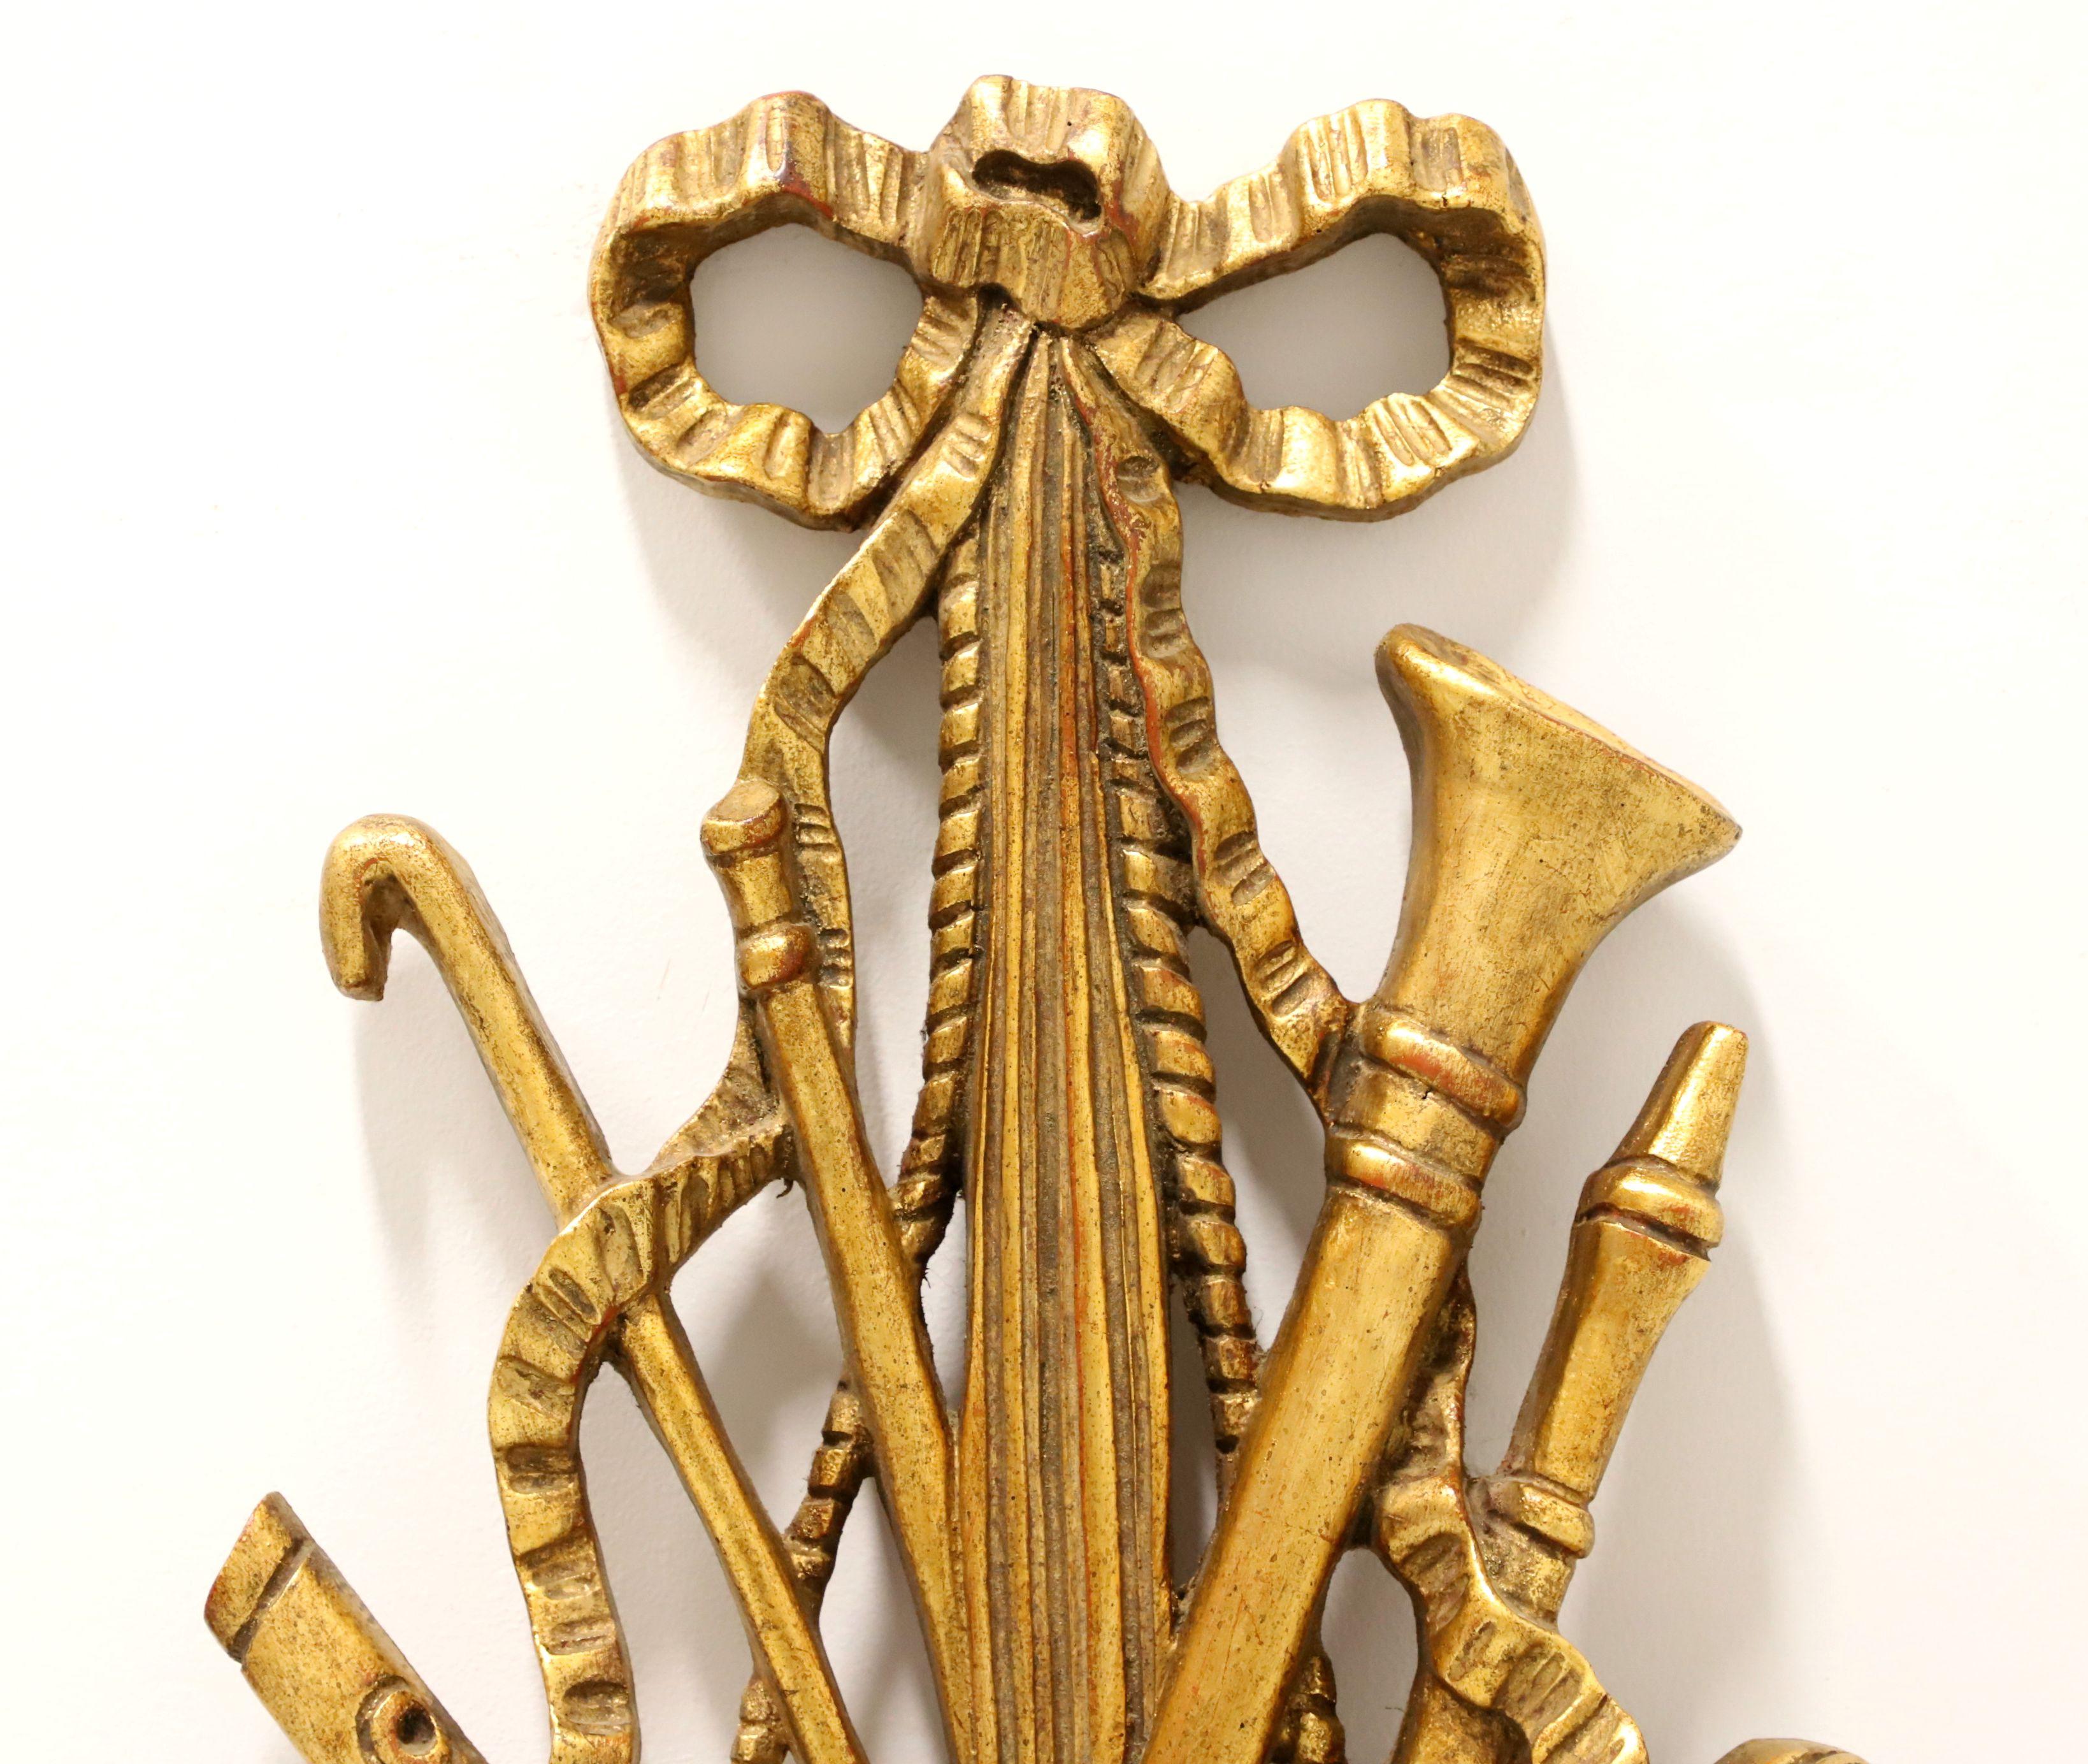 PALLADIO 1960's Carved Wood Musical Instrument Wall Sculpture - Pair In Good Condition For Sale In Charlotte, NC